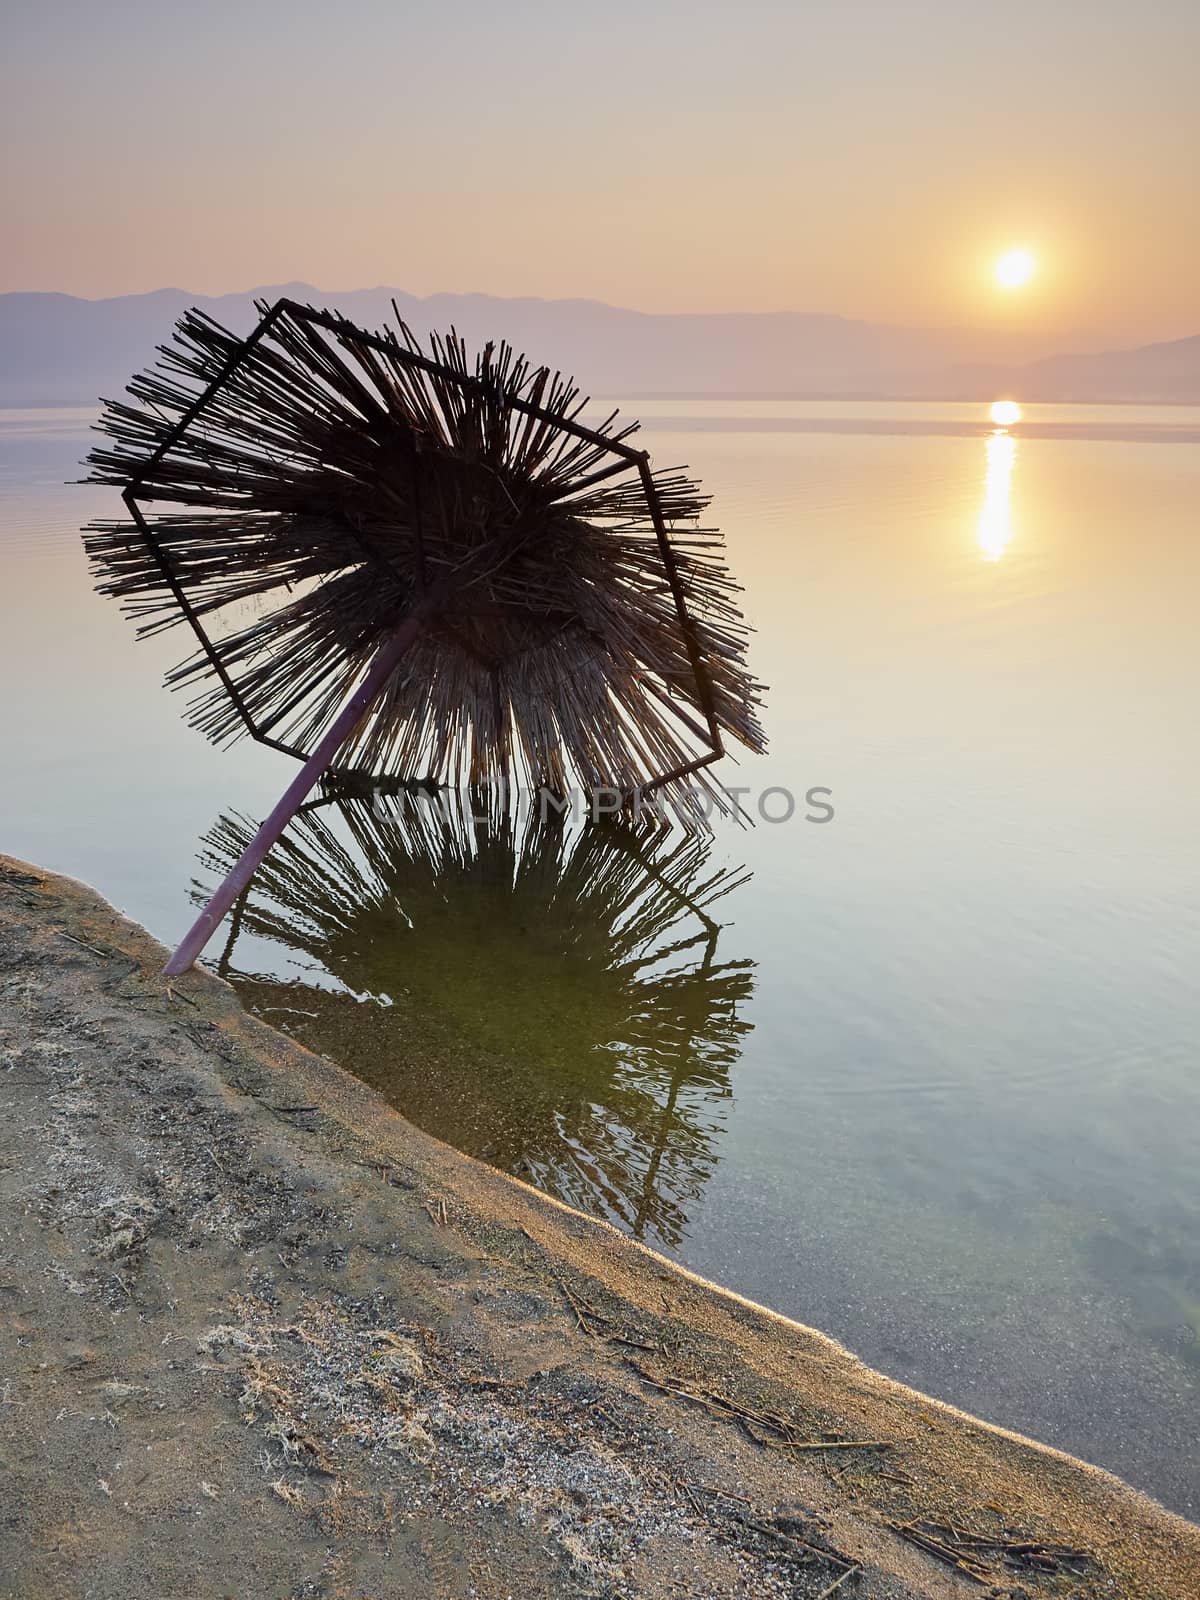 Fallen parasol reed in the lake at sunrise 